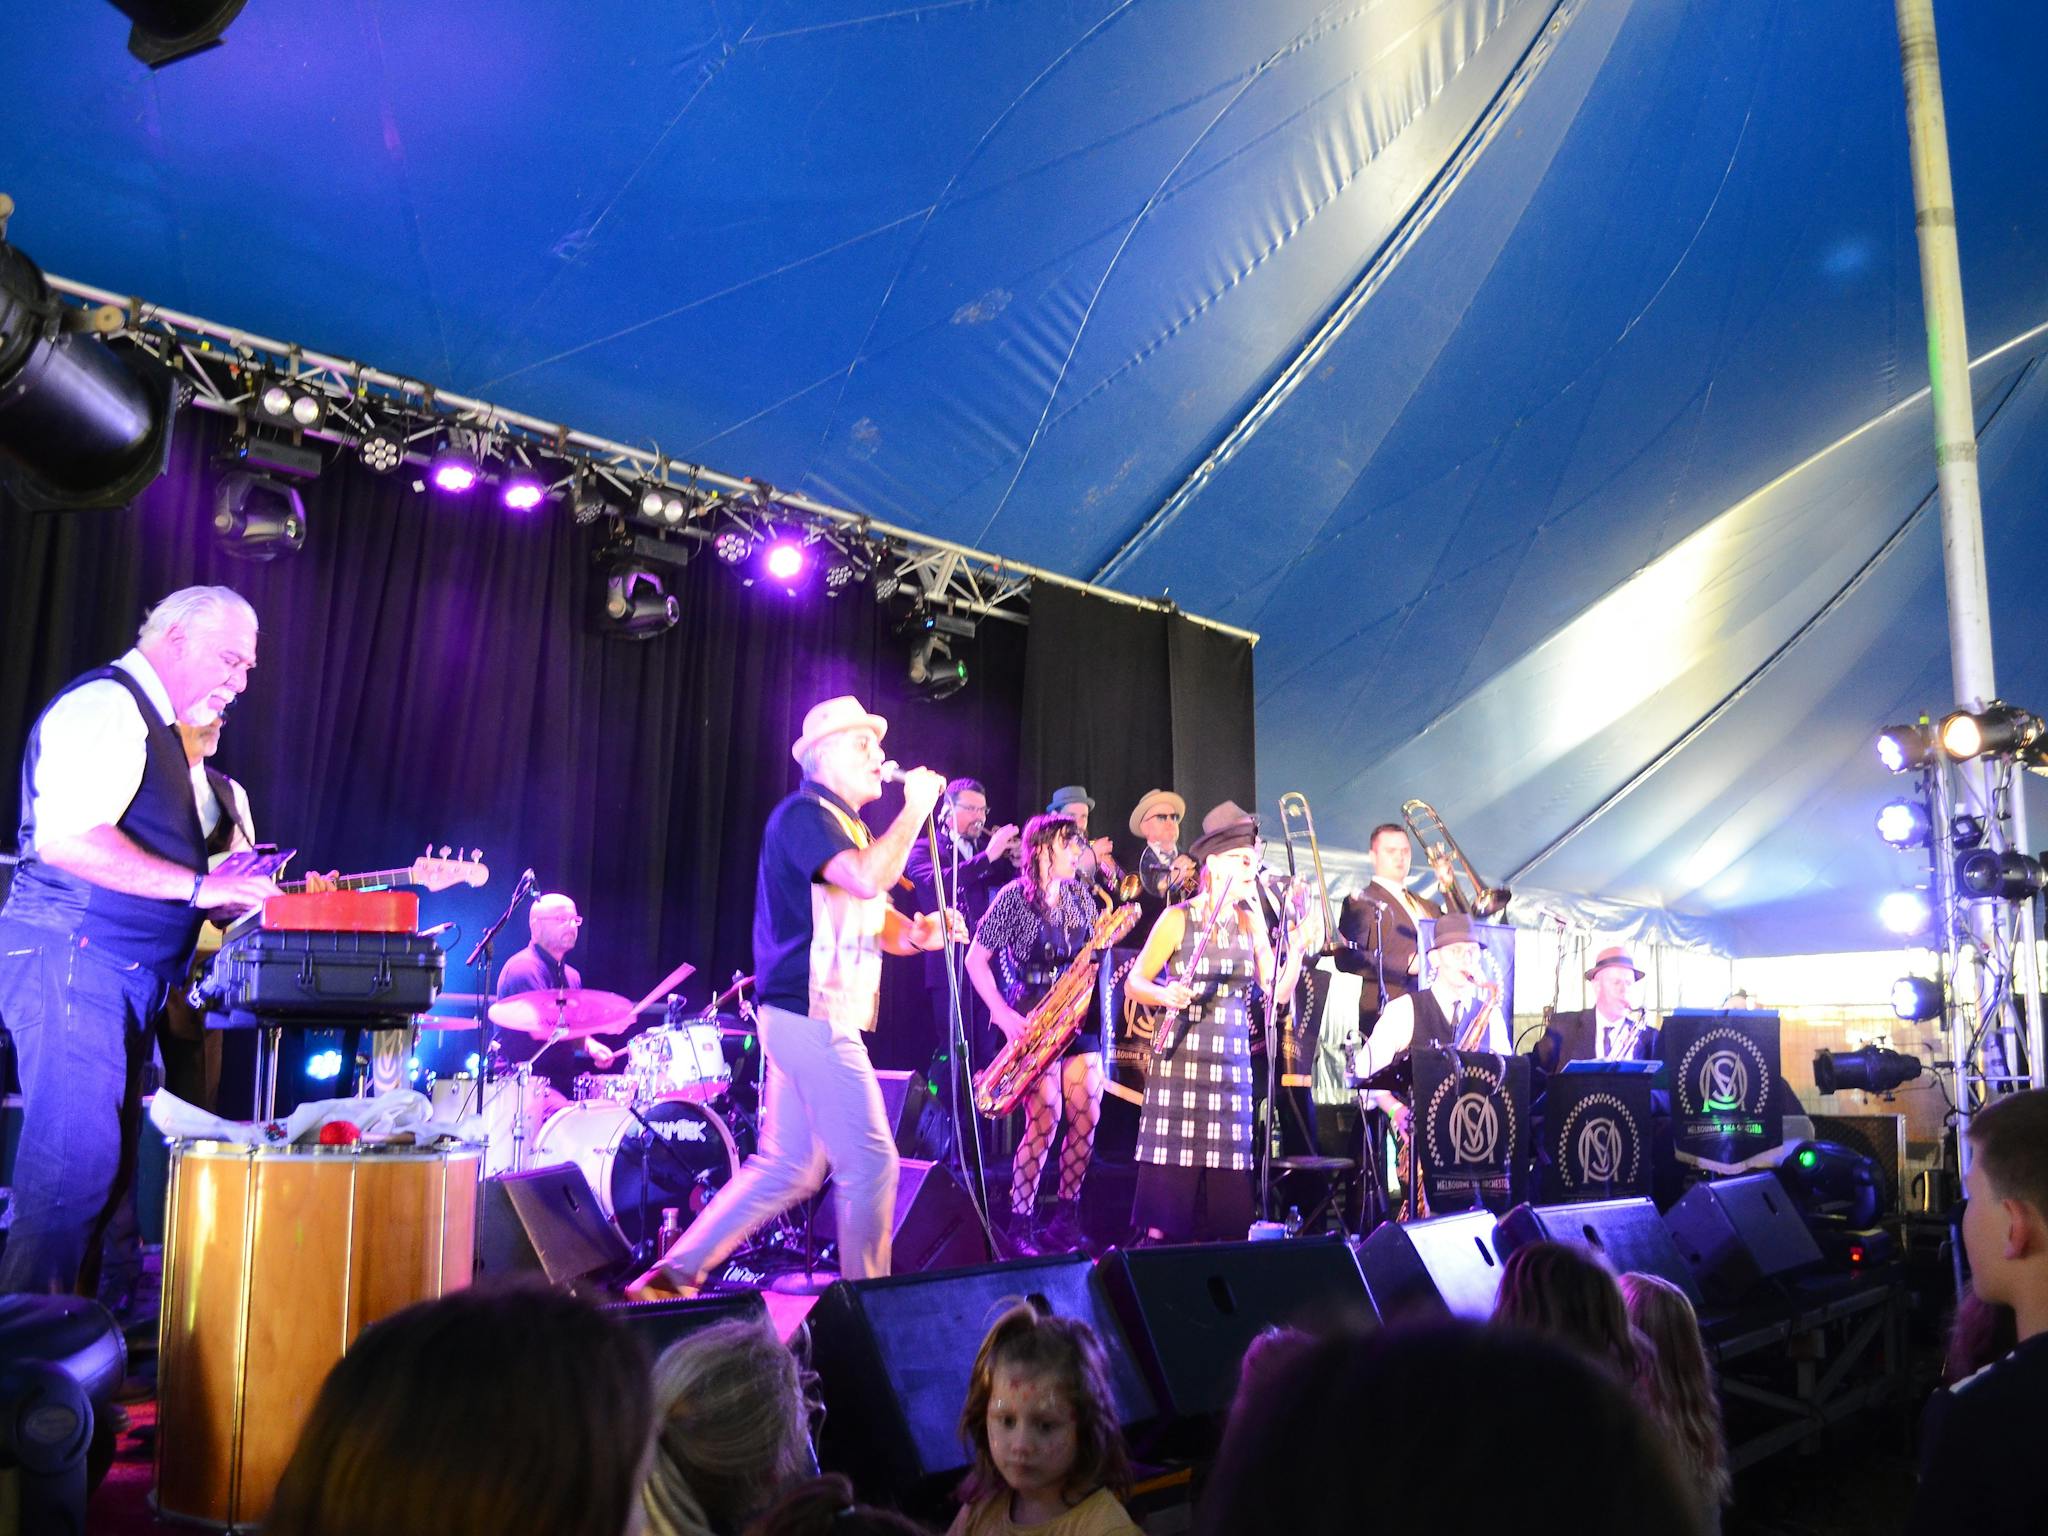 Melbourne Ska Orchestra playing in the big tent